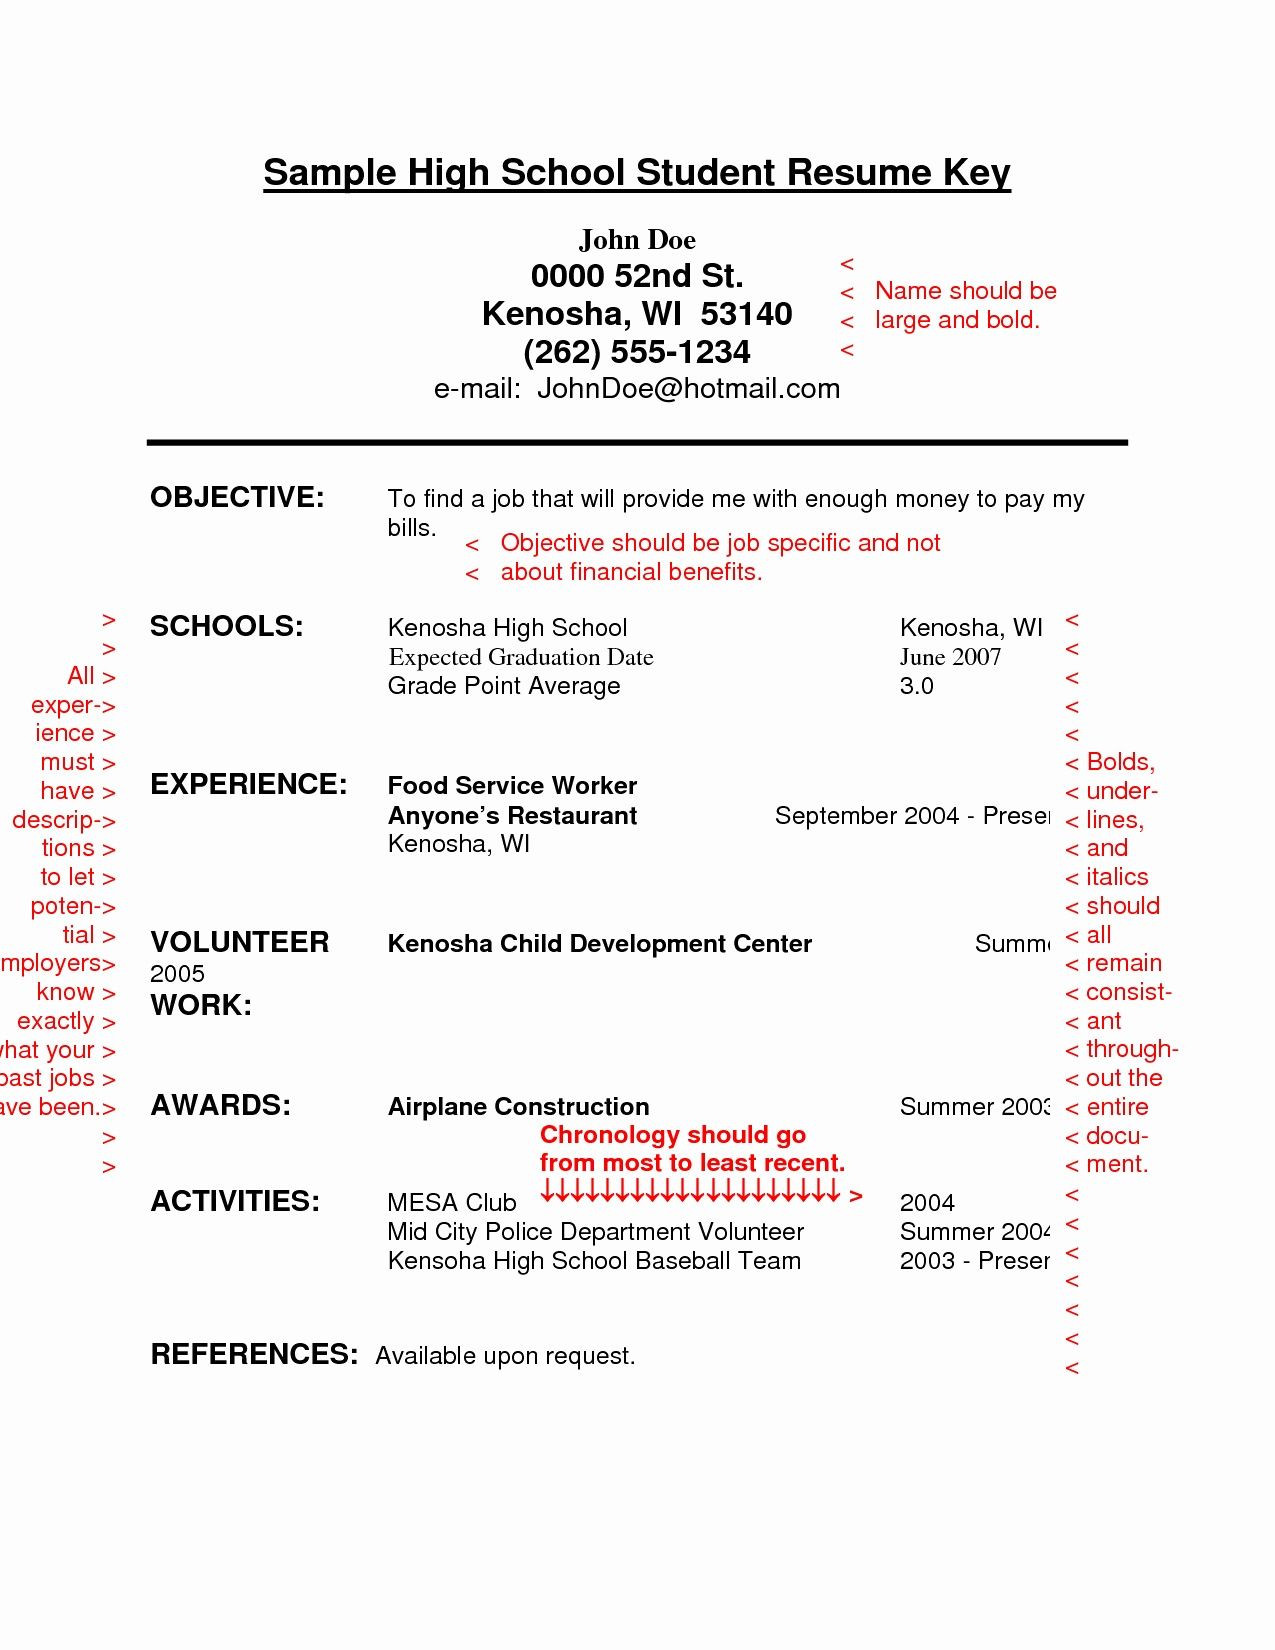 995 resume writing for high school students 75ml